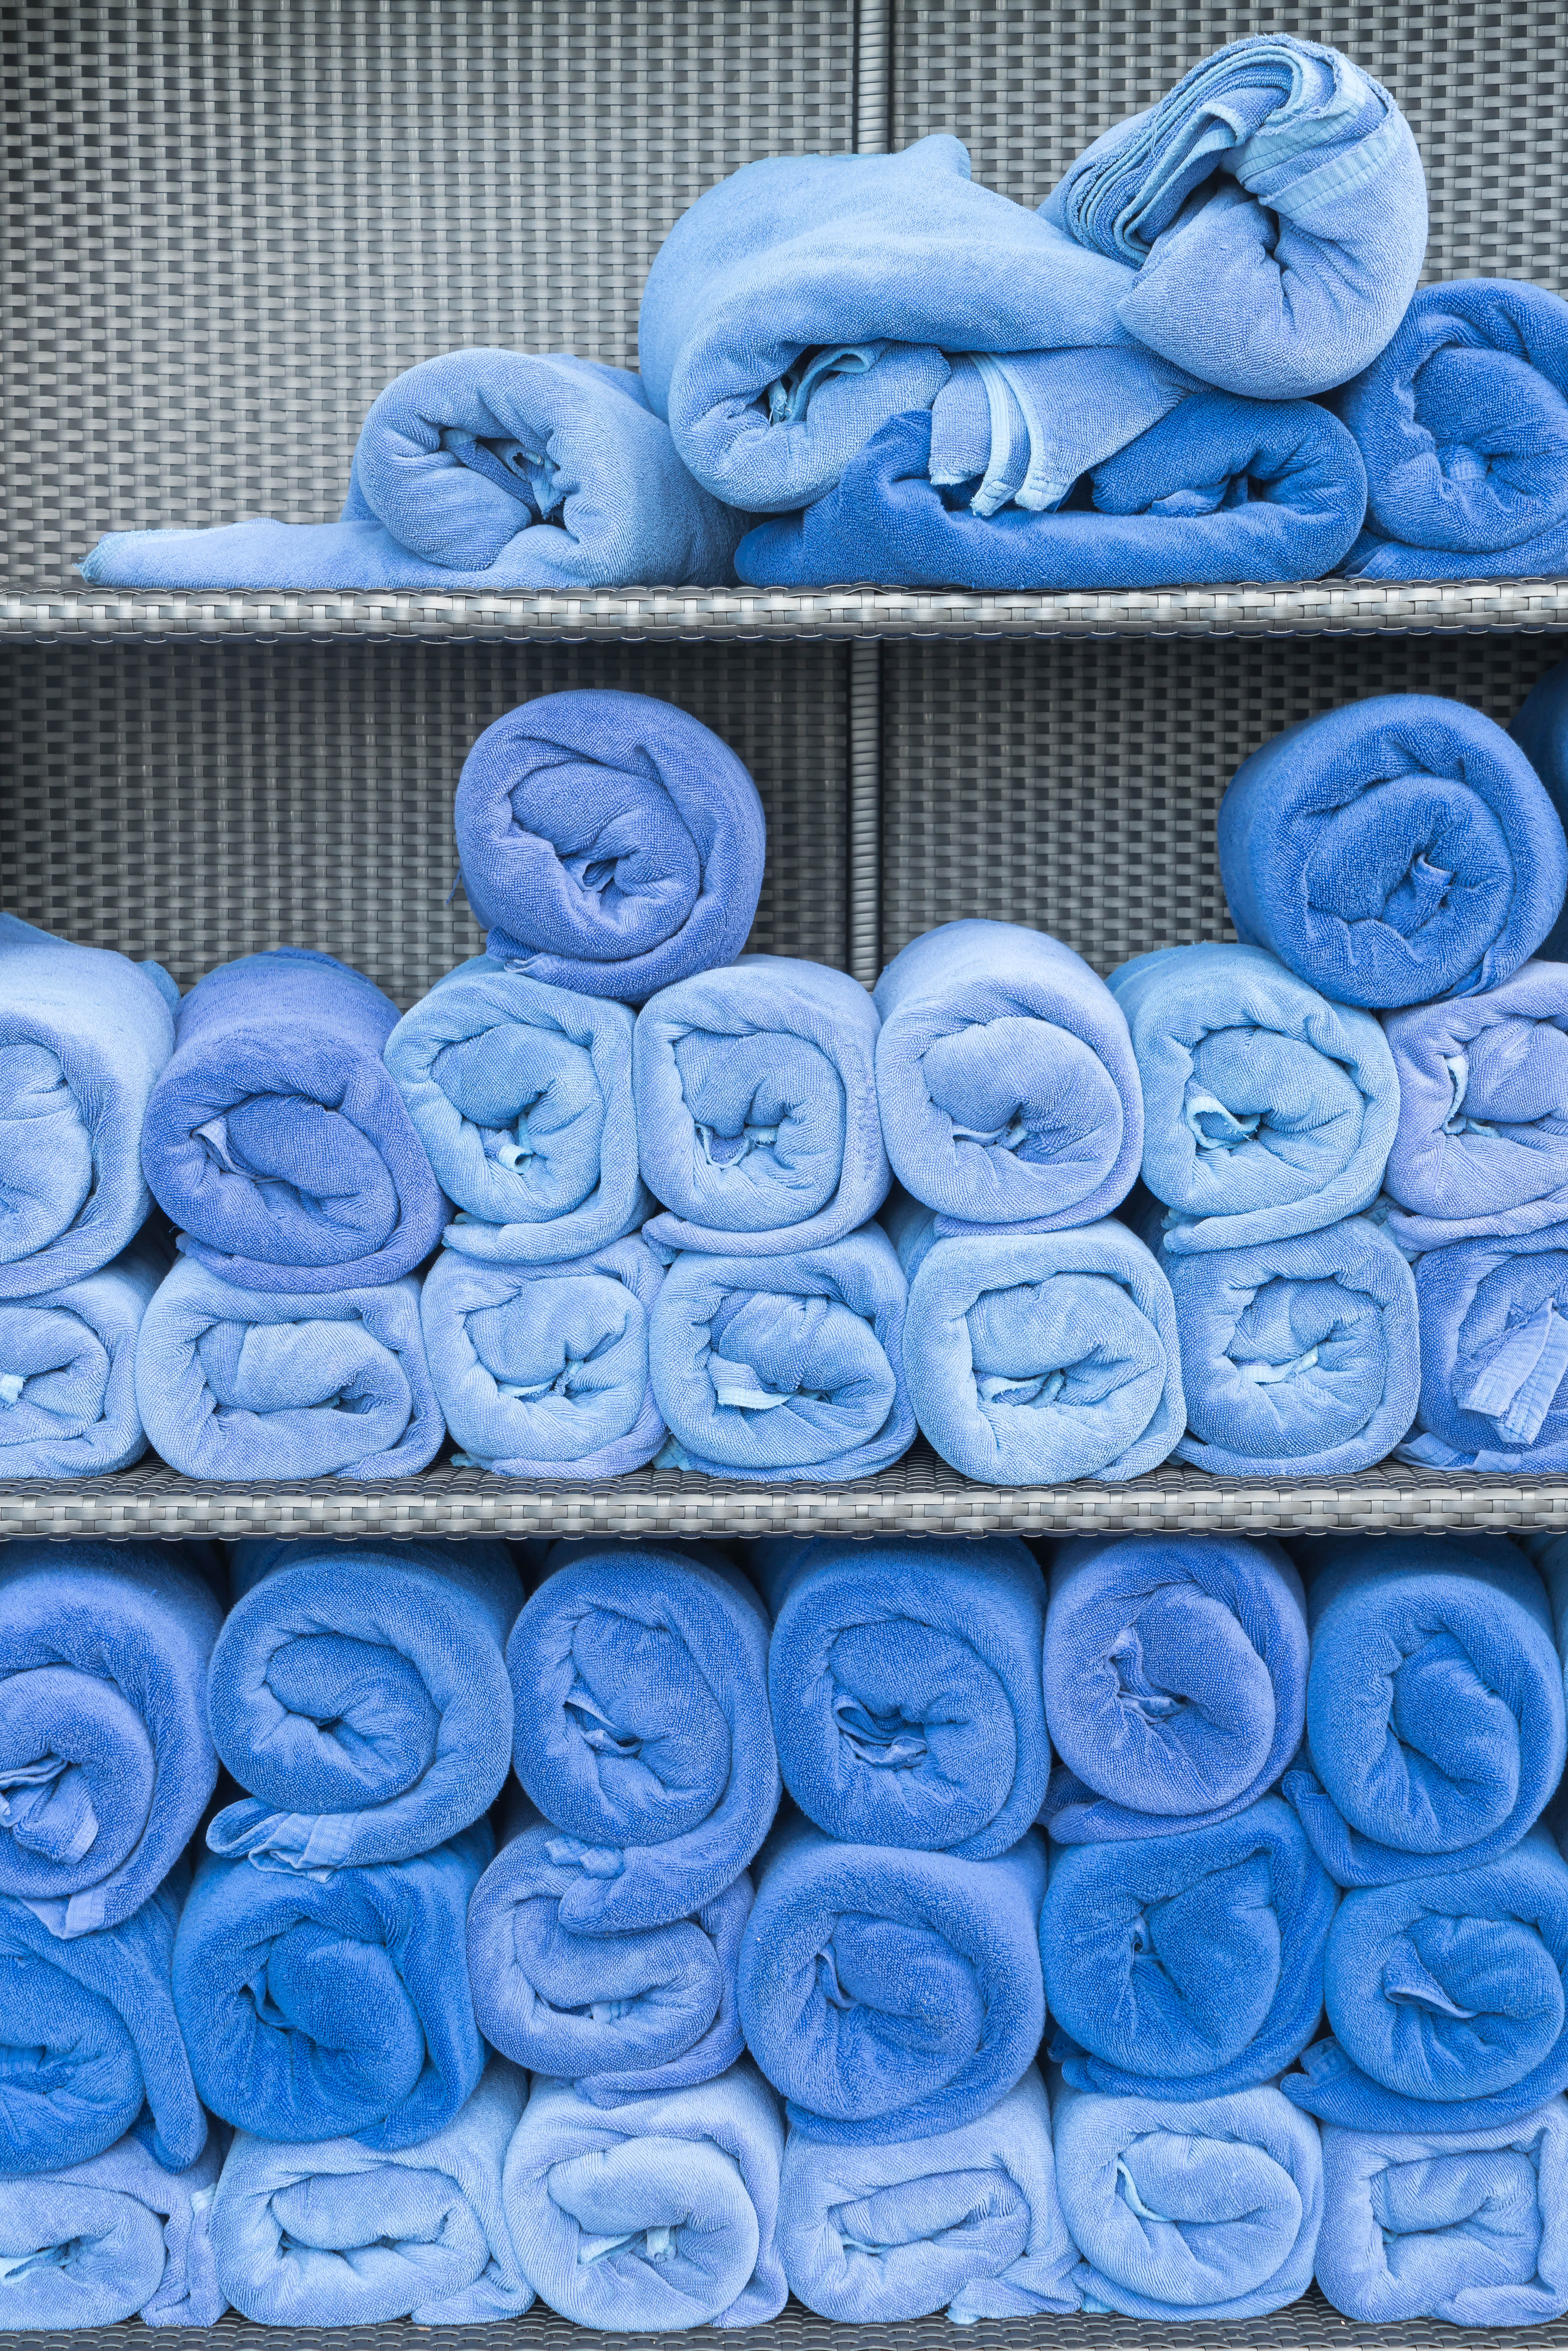 This photo shows a cupboard filled with rolled up towels